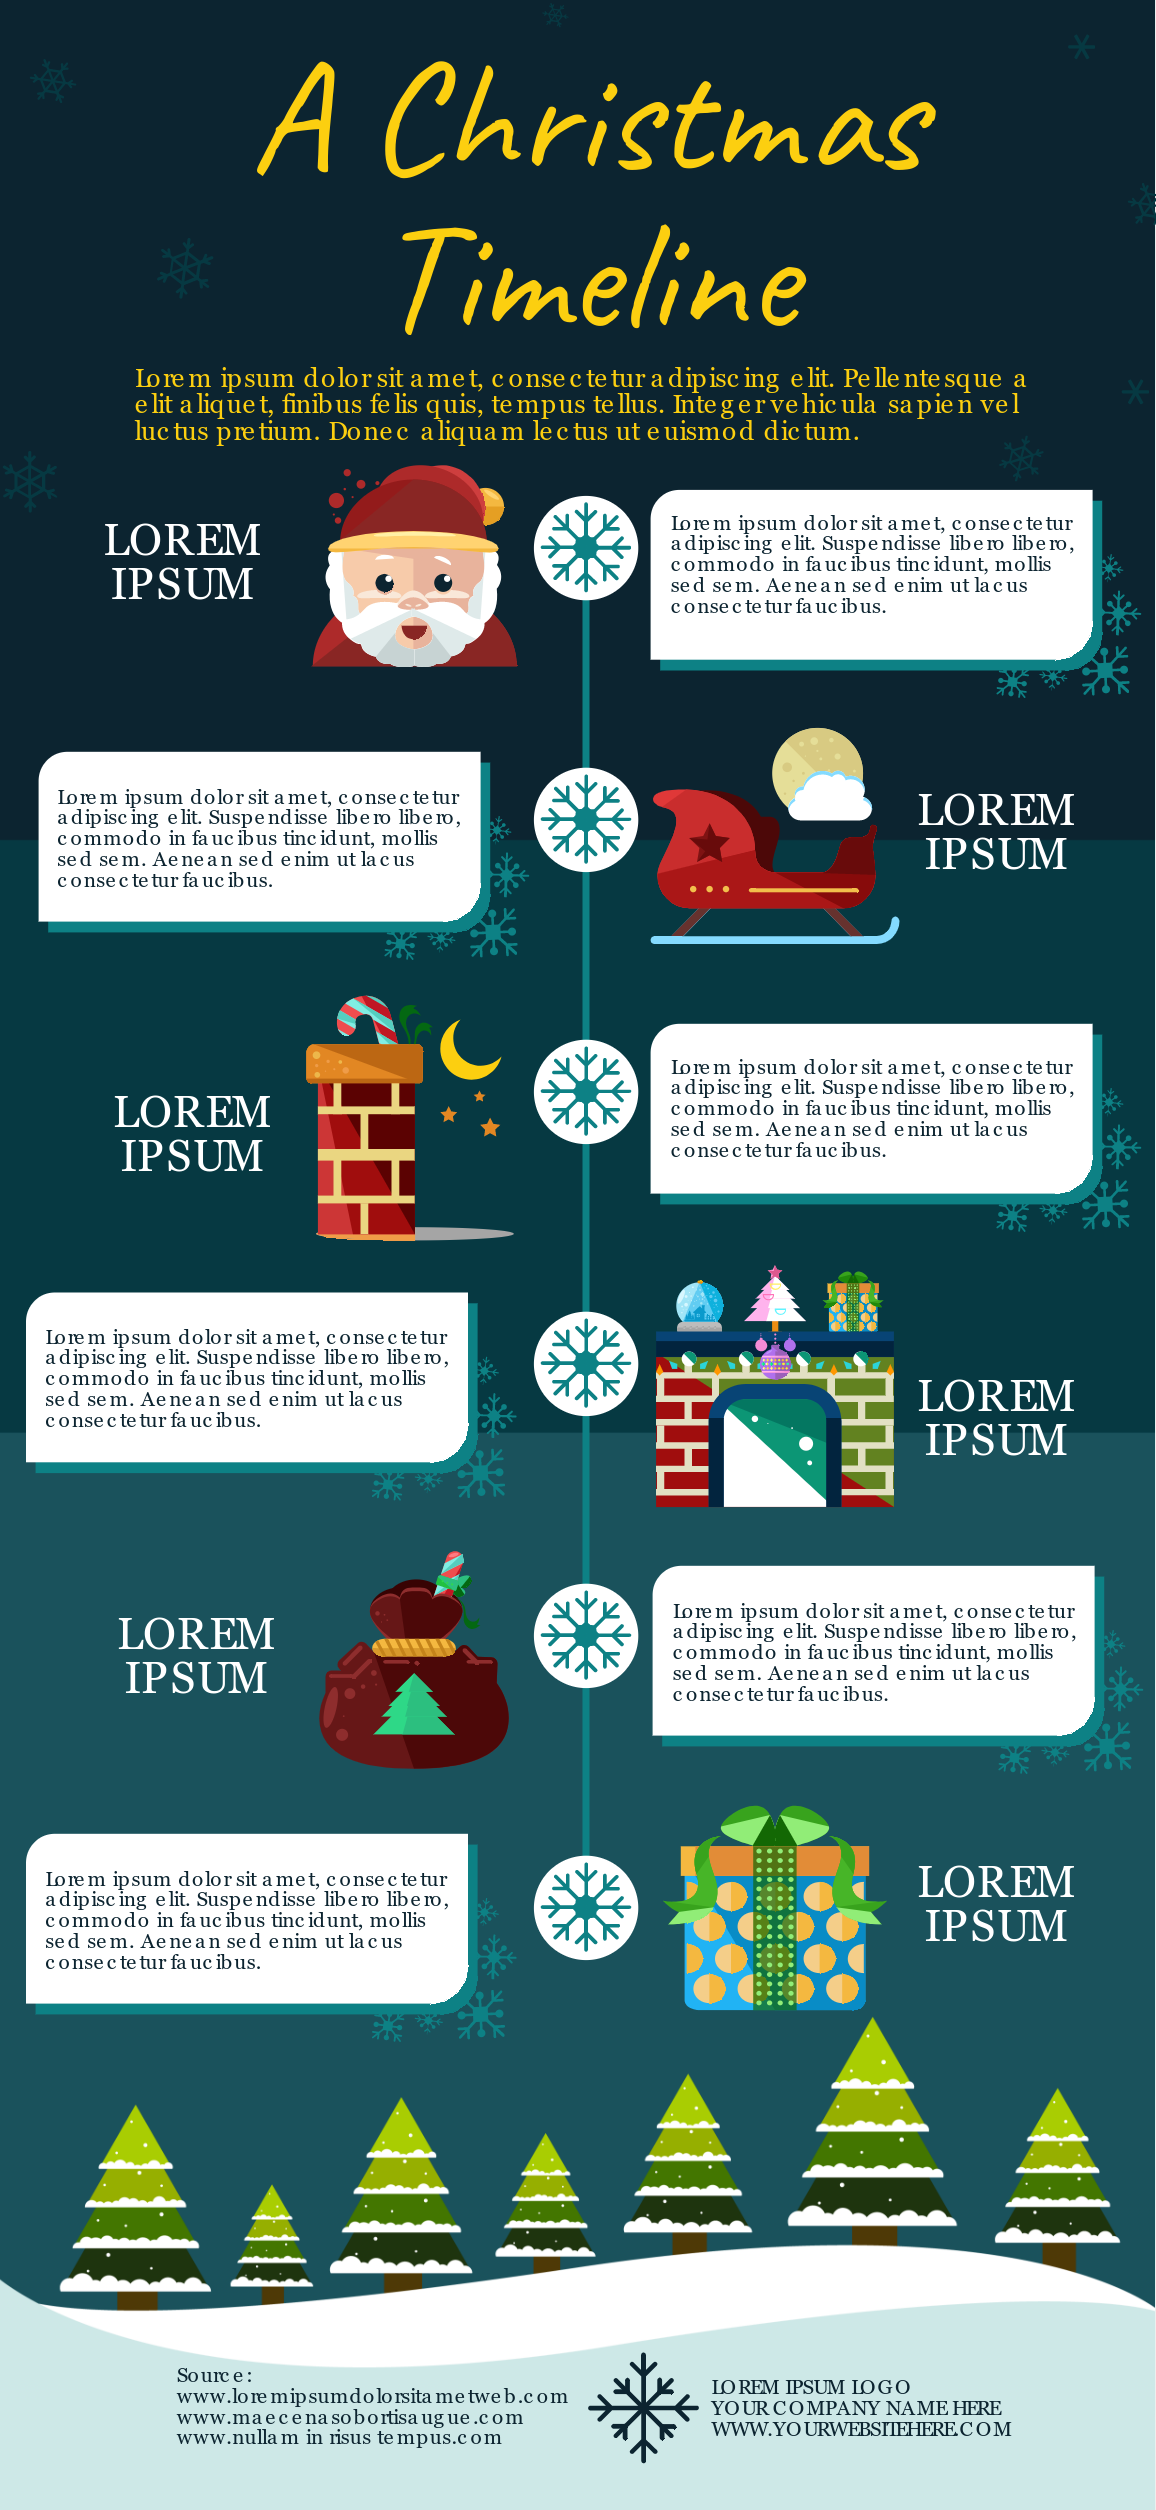 How To Make An Infographic About Christmas